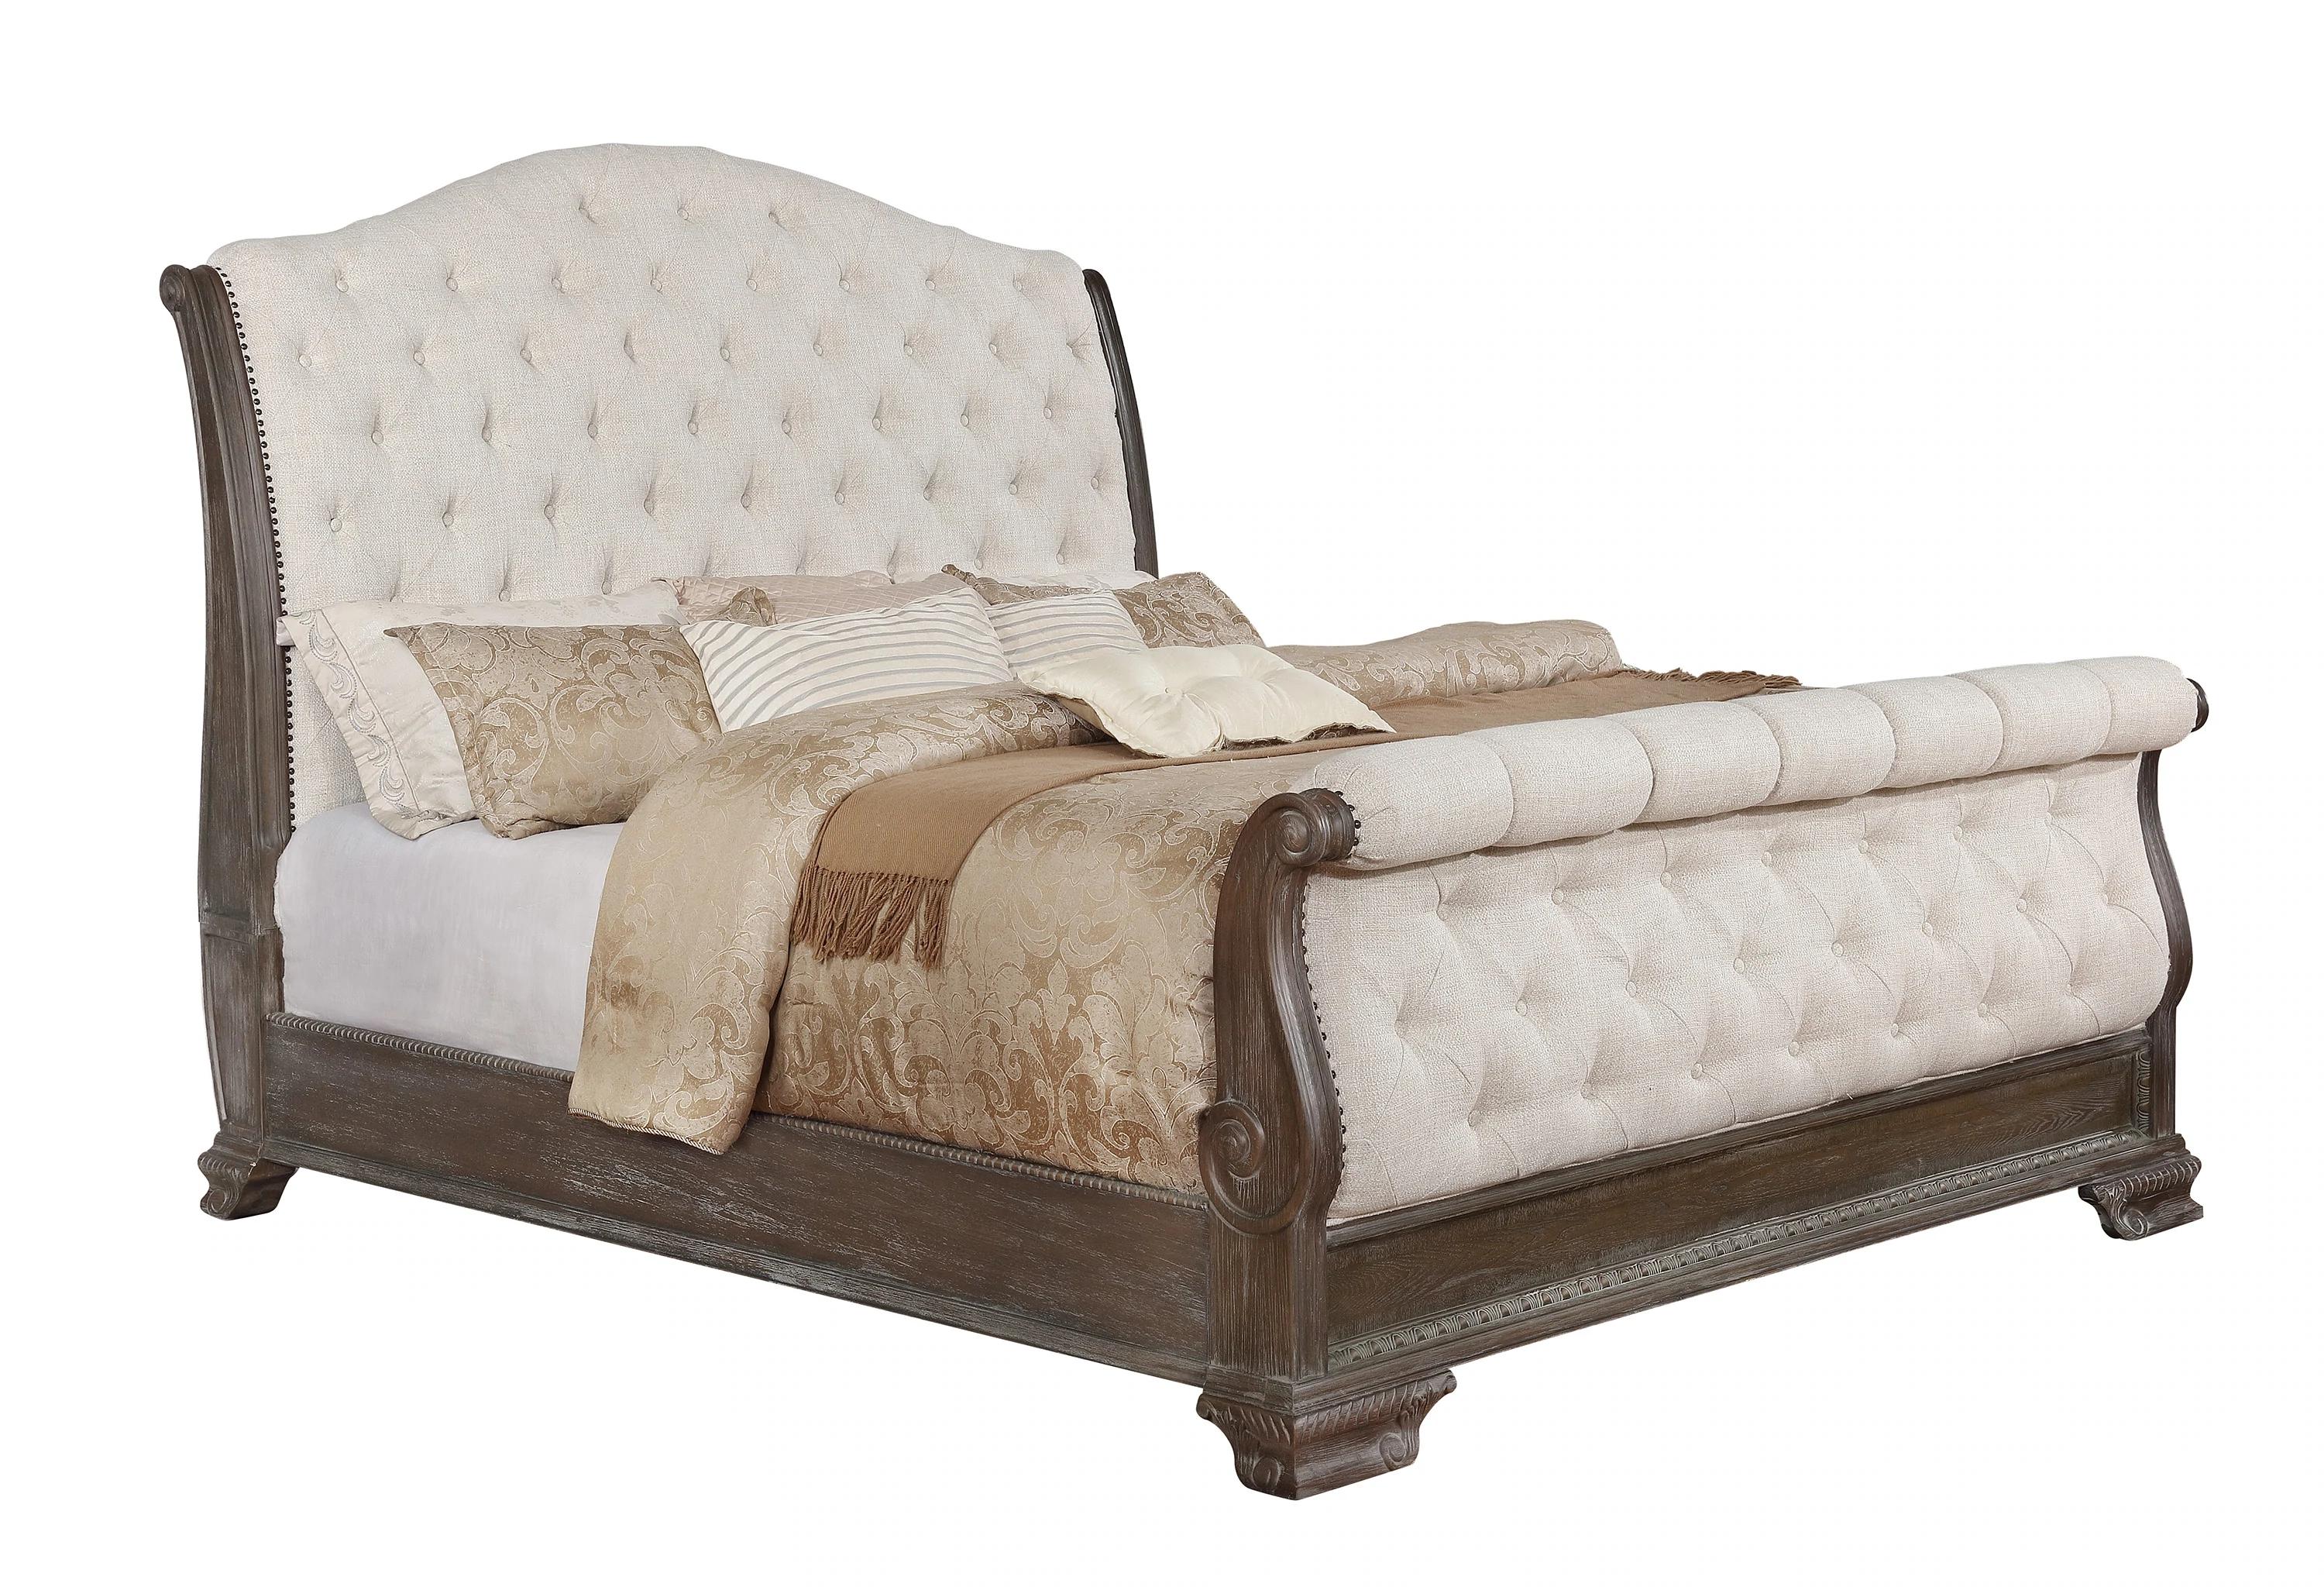 Traditional, Vintage Panel Bed Sheffield B1120-Q-Bed in Beige / Brown Fabric